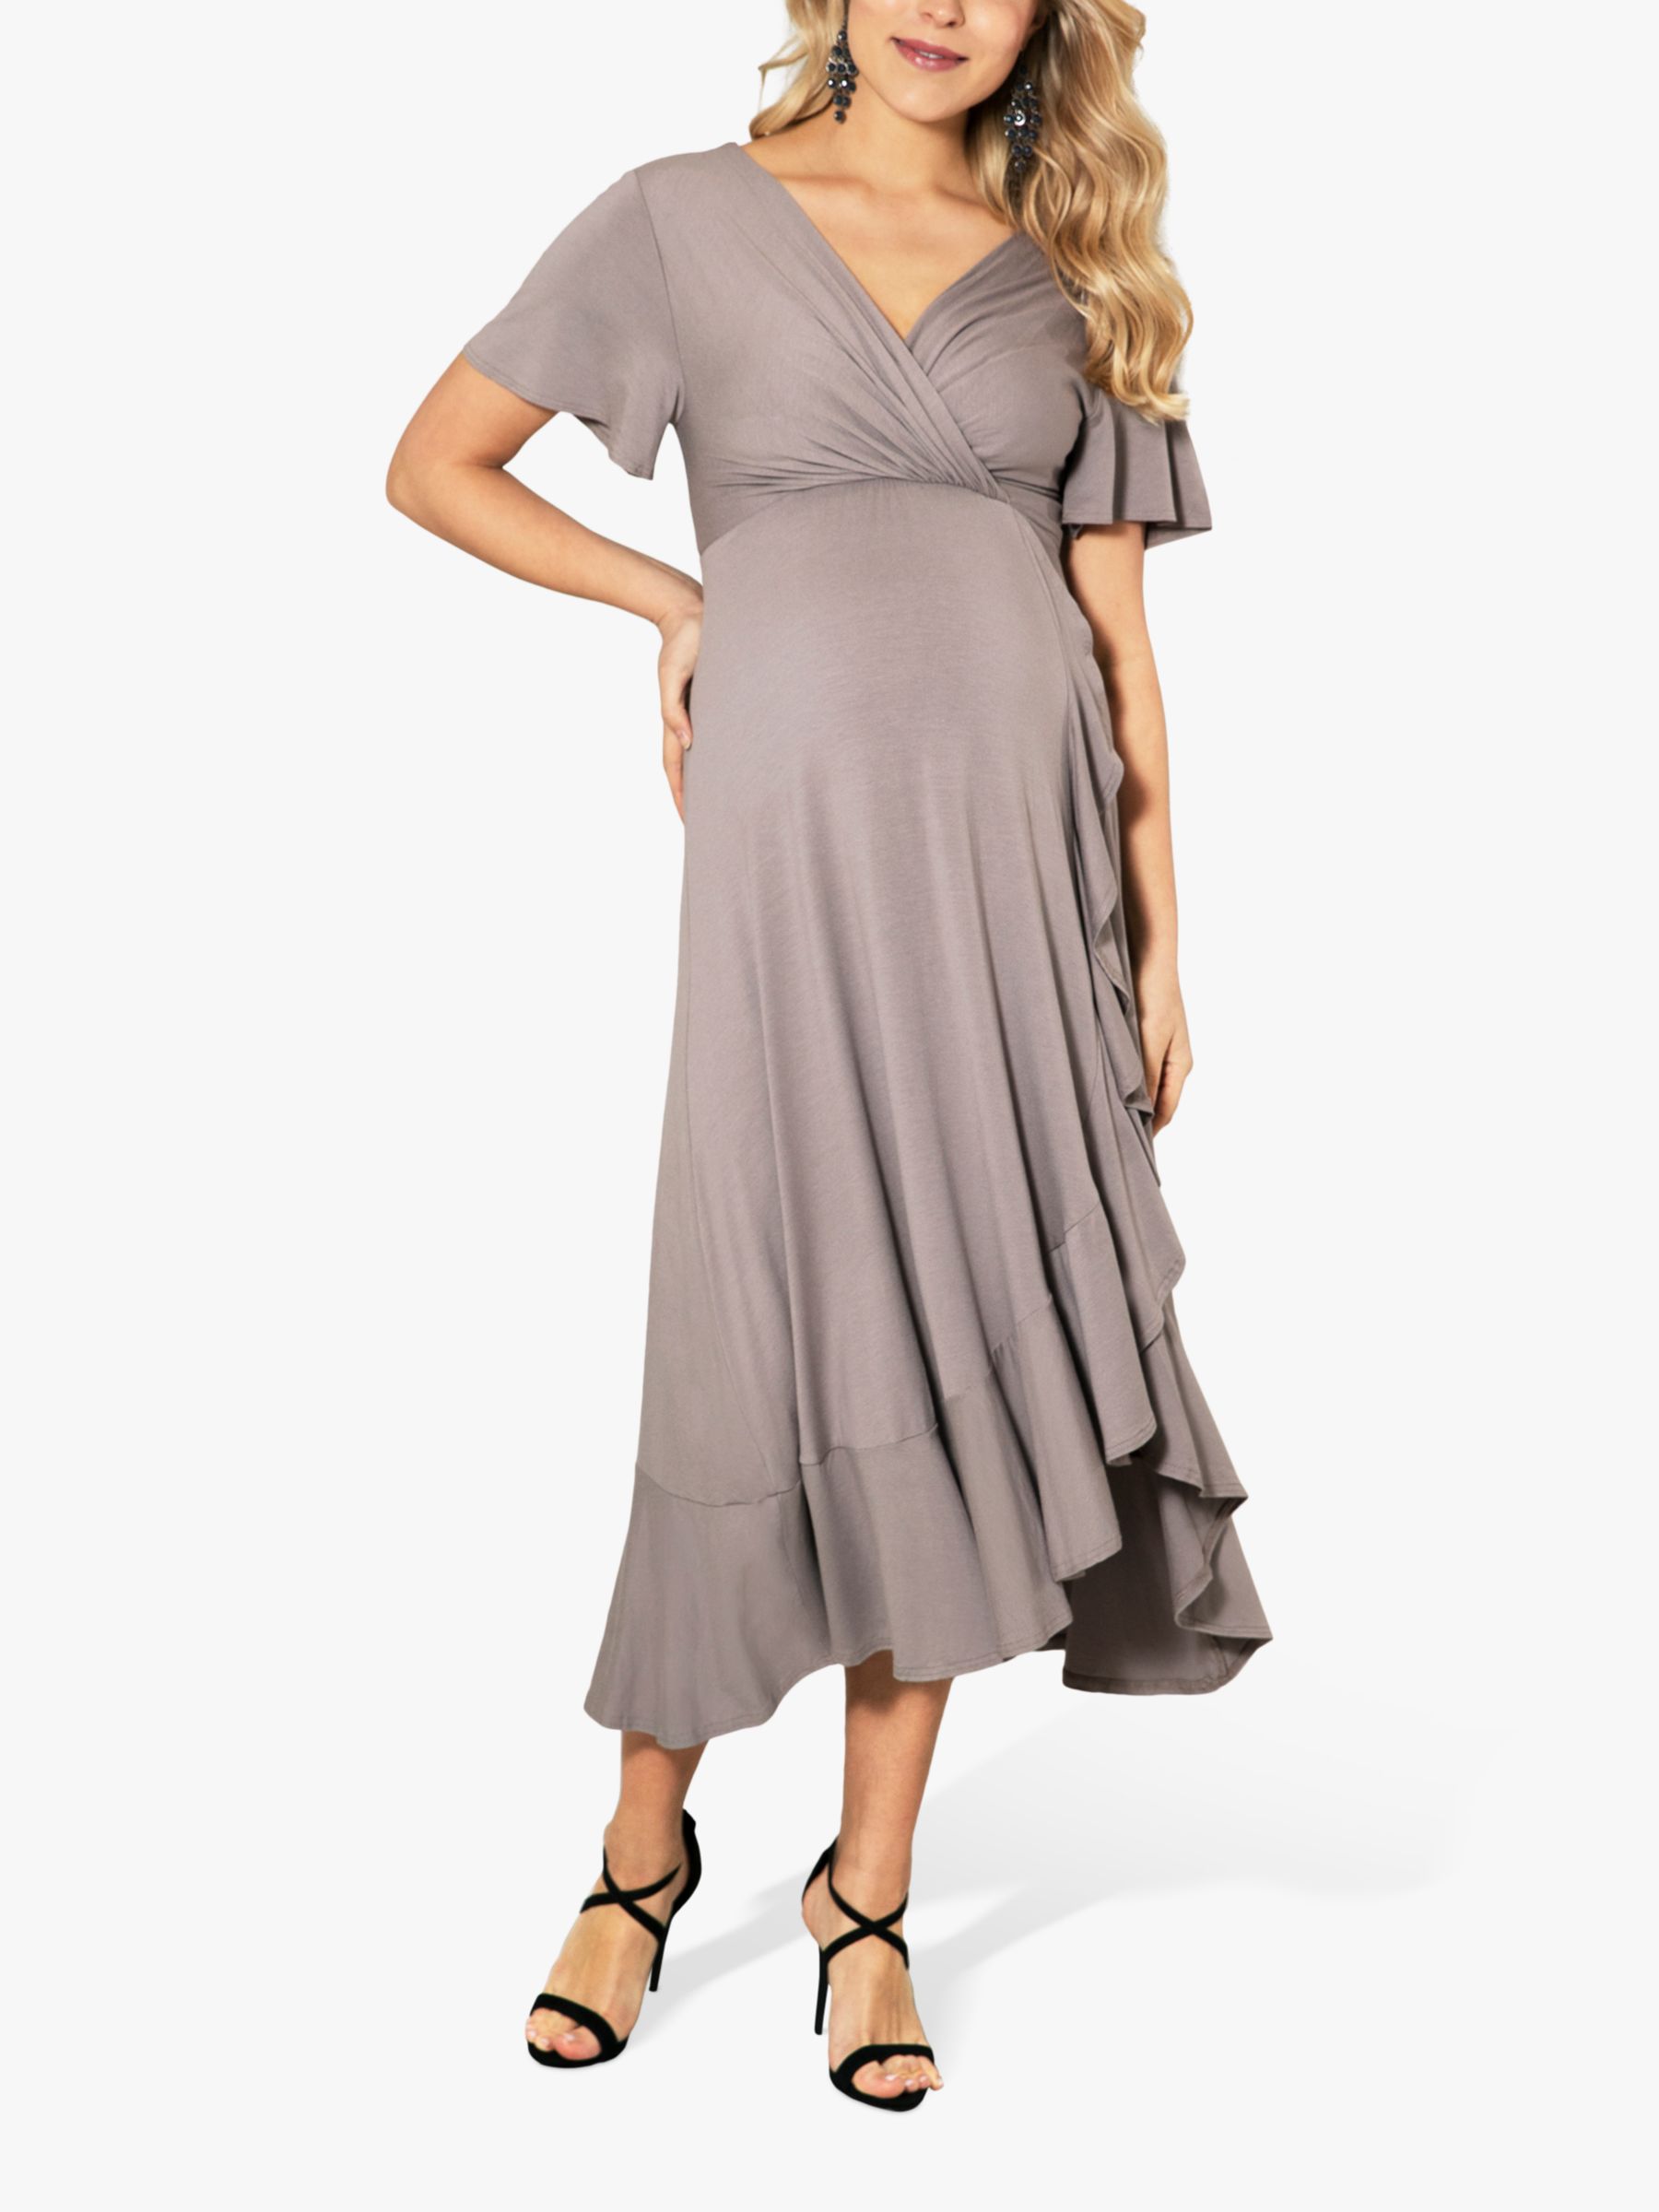 Naomi Maternity Nursing Dress Black - Maternity Wedding Dresses, Evening  Wear and Party Clothes by Tiffany Rose US